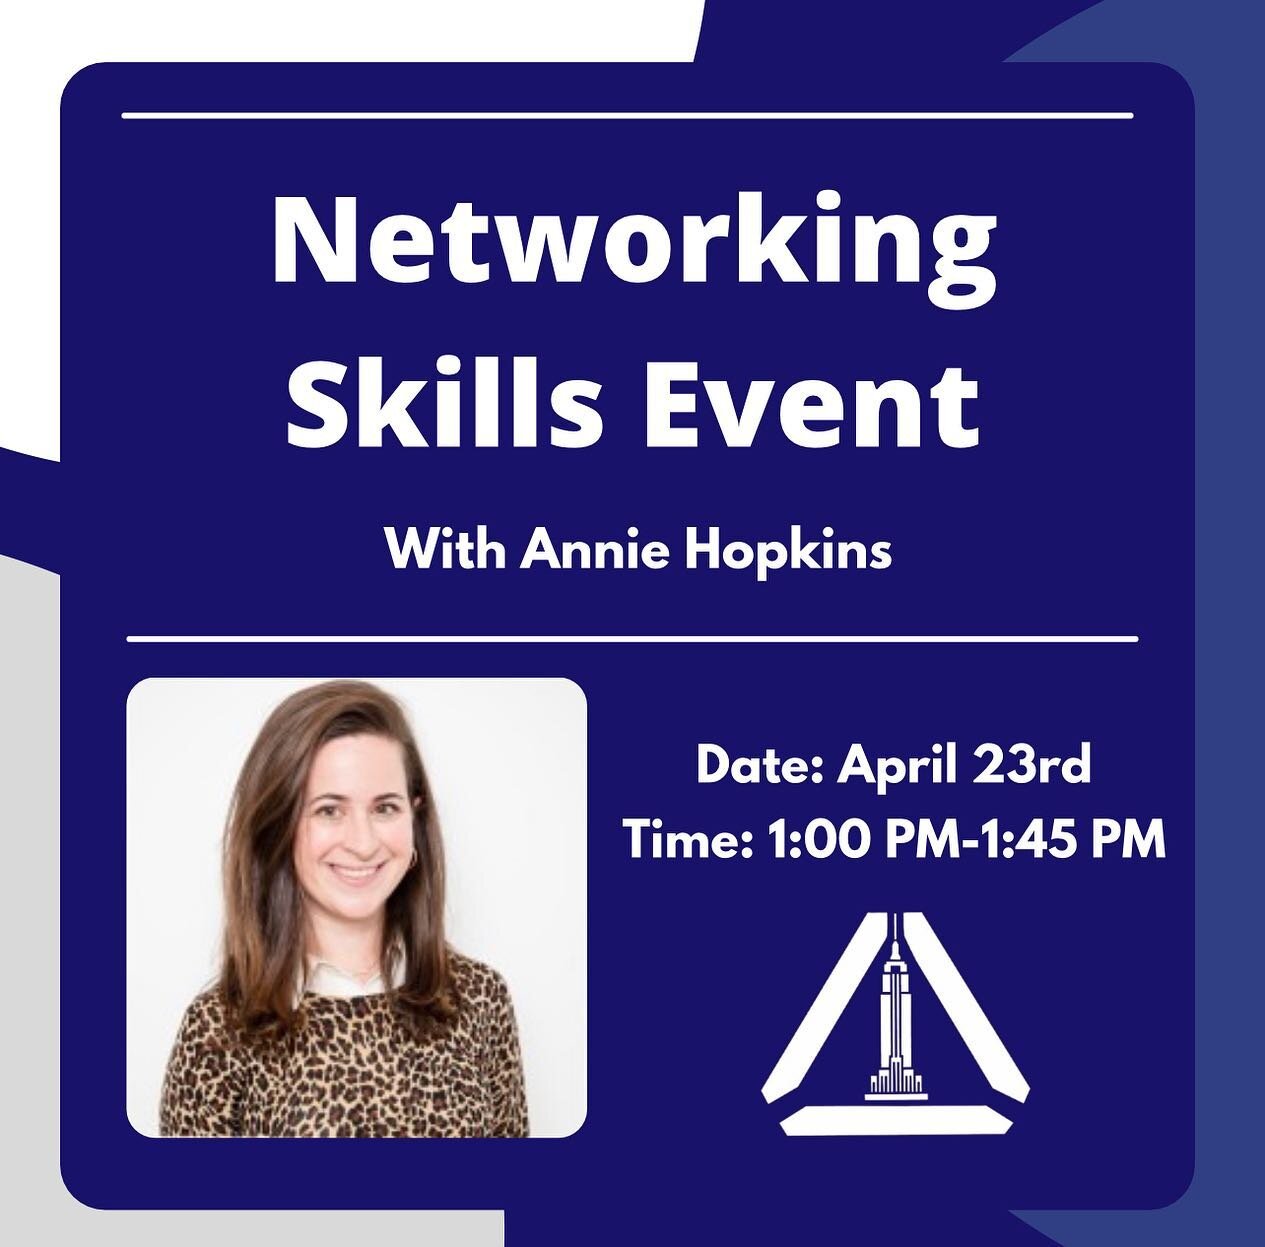 The Junior Economic Club of New York City is excited to host an event with Annie Hopkins, the head of Americas Graduate Recruiting at Deutsche Bank! Join us on Saturday April 23rd from 1:00 PM - 1:45 PM EST for a workshop and Q&amp;A on networking.